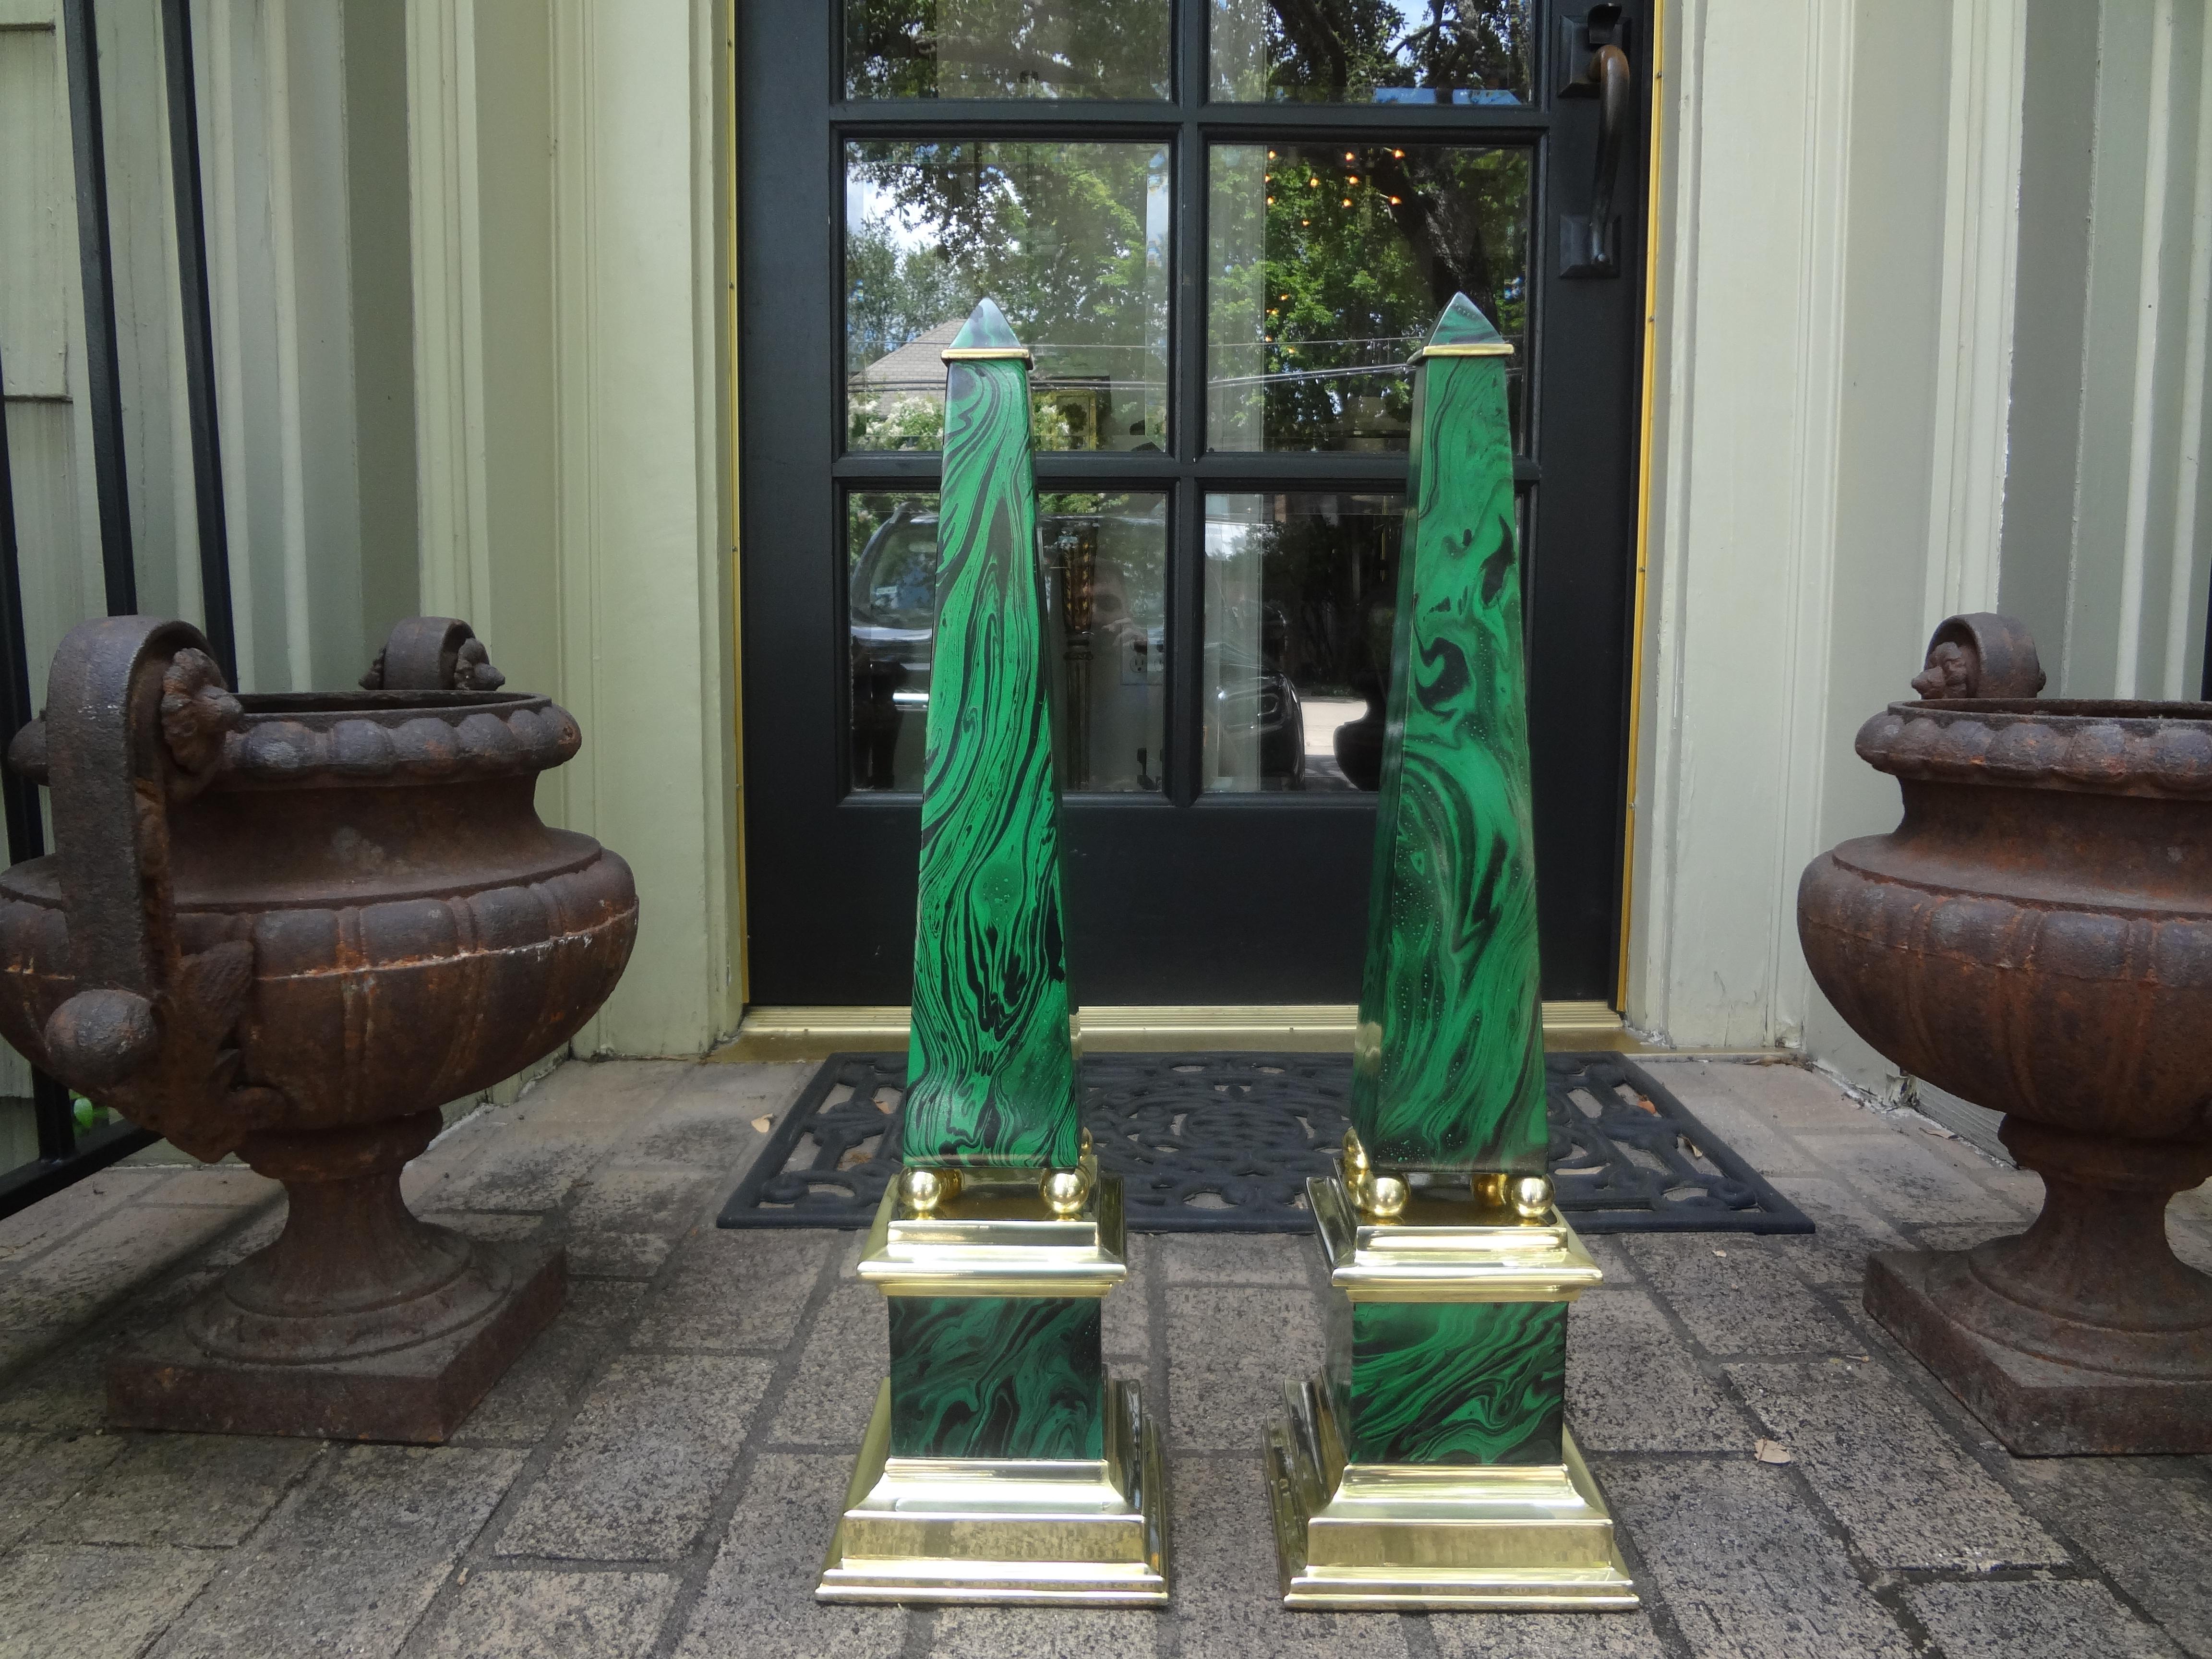 Pair of Faux malachite and brass obelisks.
Fantastic pair of vintage faux malachite and brass obelisks. This beautiful pair of midcentury obelisks are a pair but in the spirit of naturally occurring malachite, they appear a bit different in